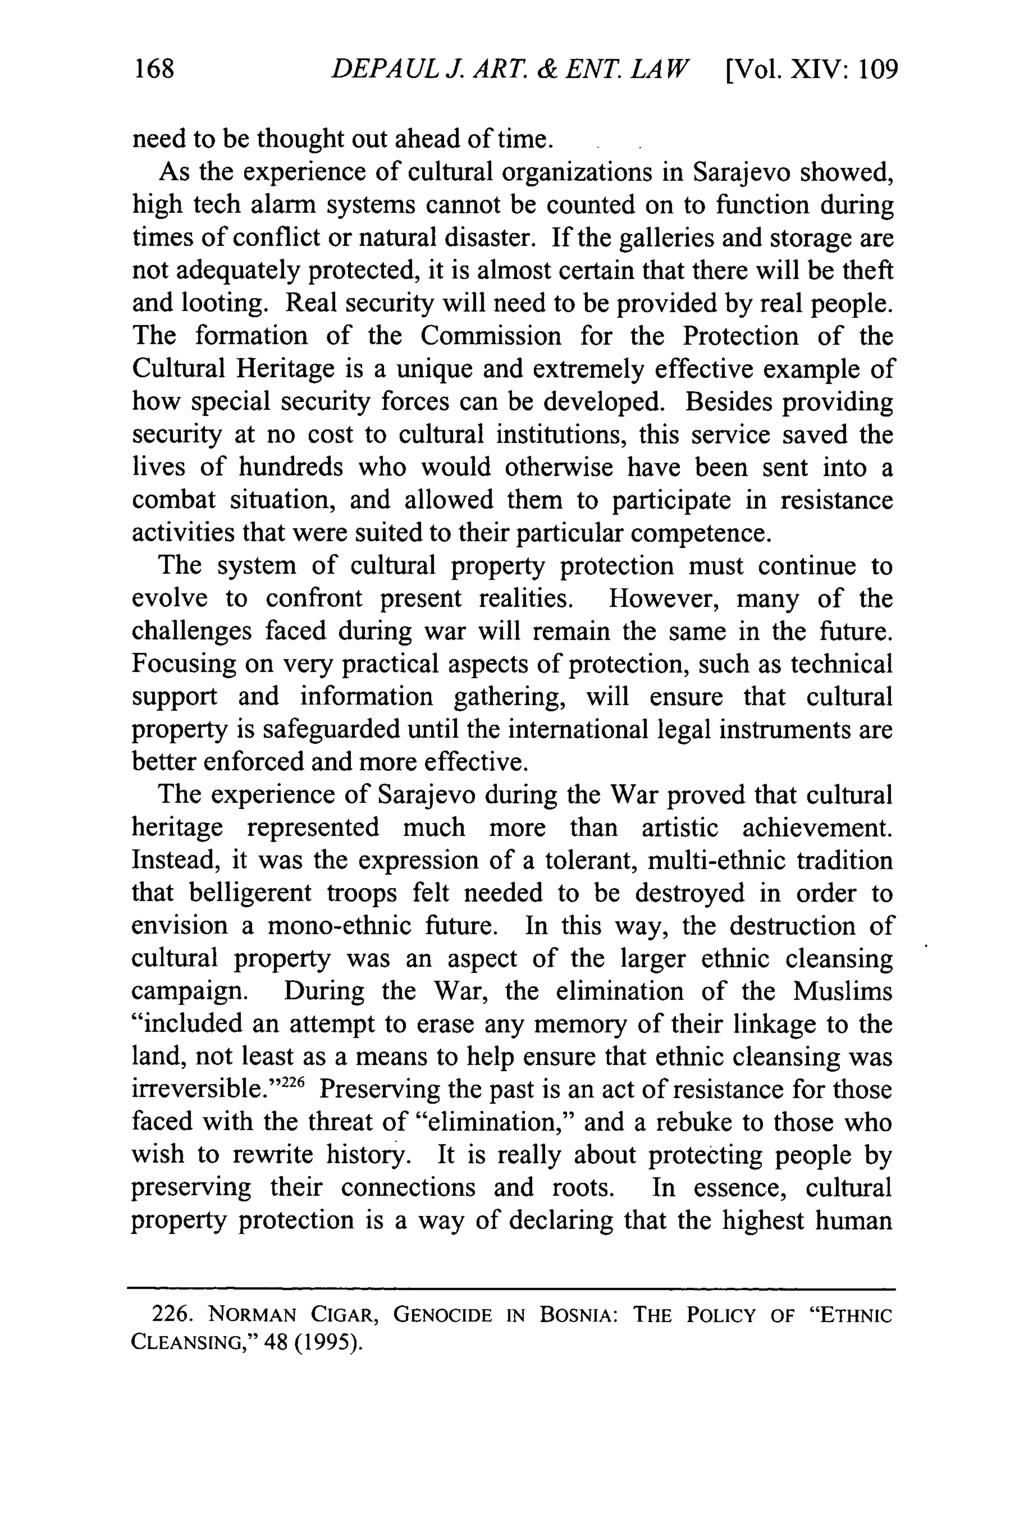 DePaul Journal of Art, Technology & Intellectual Property Law, Vol. 14, Iss. 1 [2016], Art. 5 DEPAULJ.ART&ENT.LAW [Vol.XIV: 109 need to be thought out ahead of time.